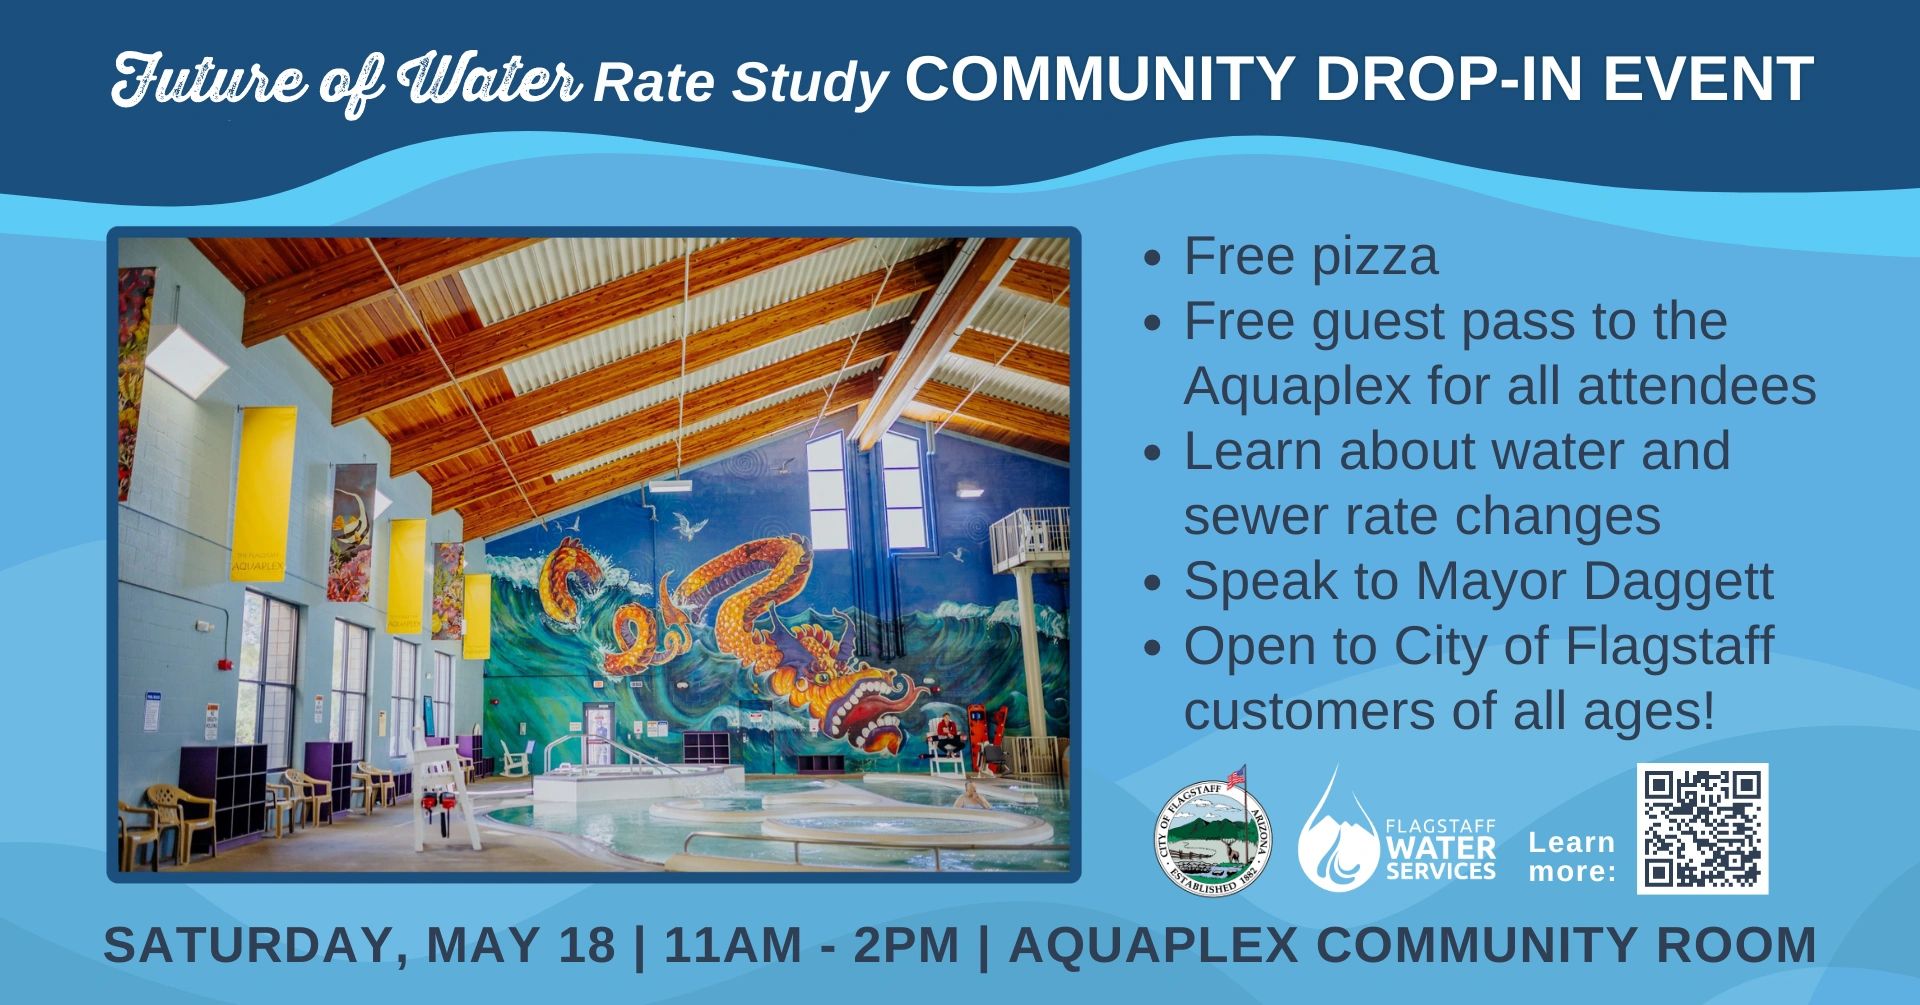 A banner for the upcoming Community Drop-In Event at the Aquaplex on May 18th from 11 am to 2 pm.